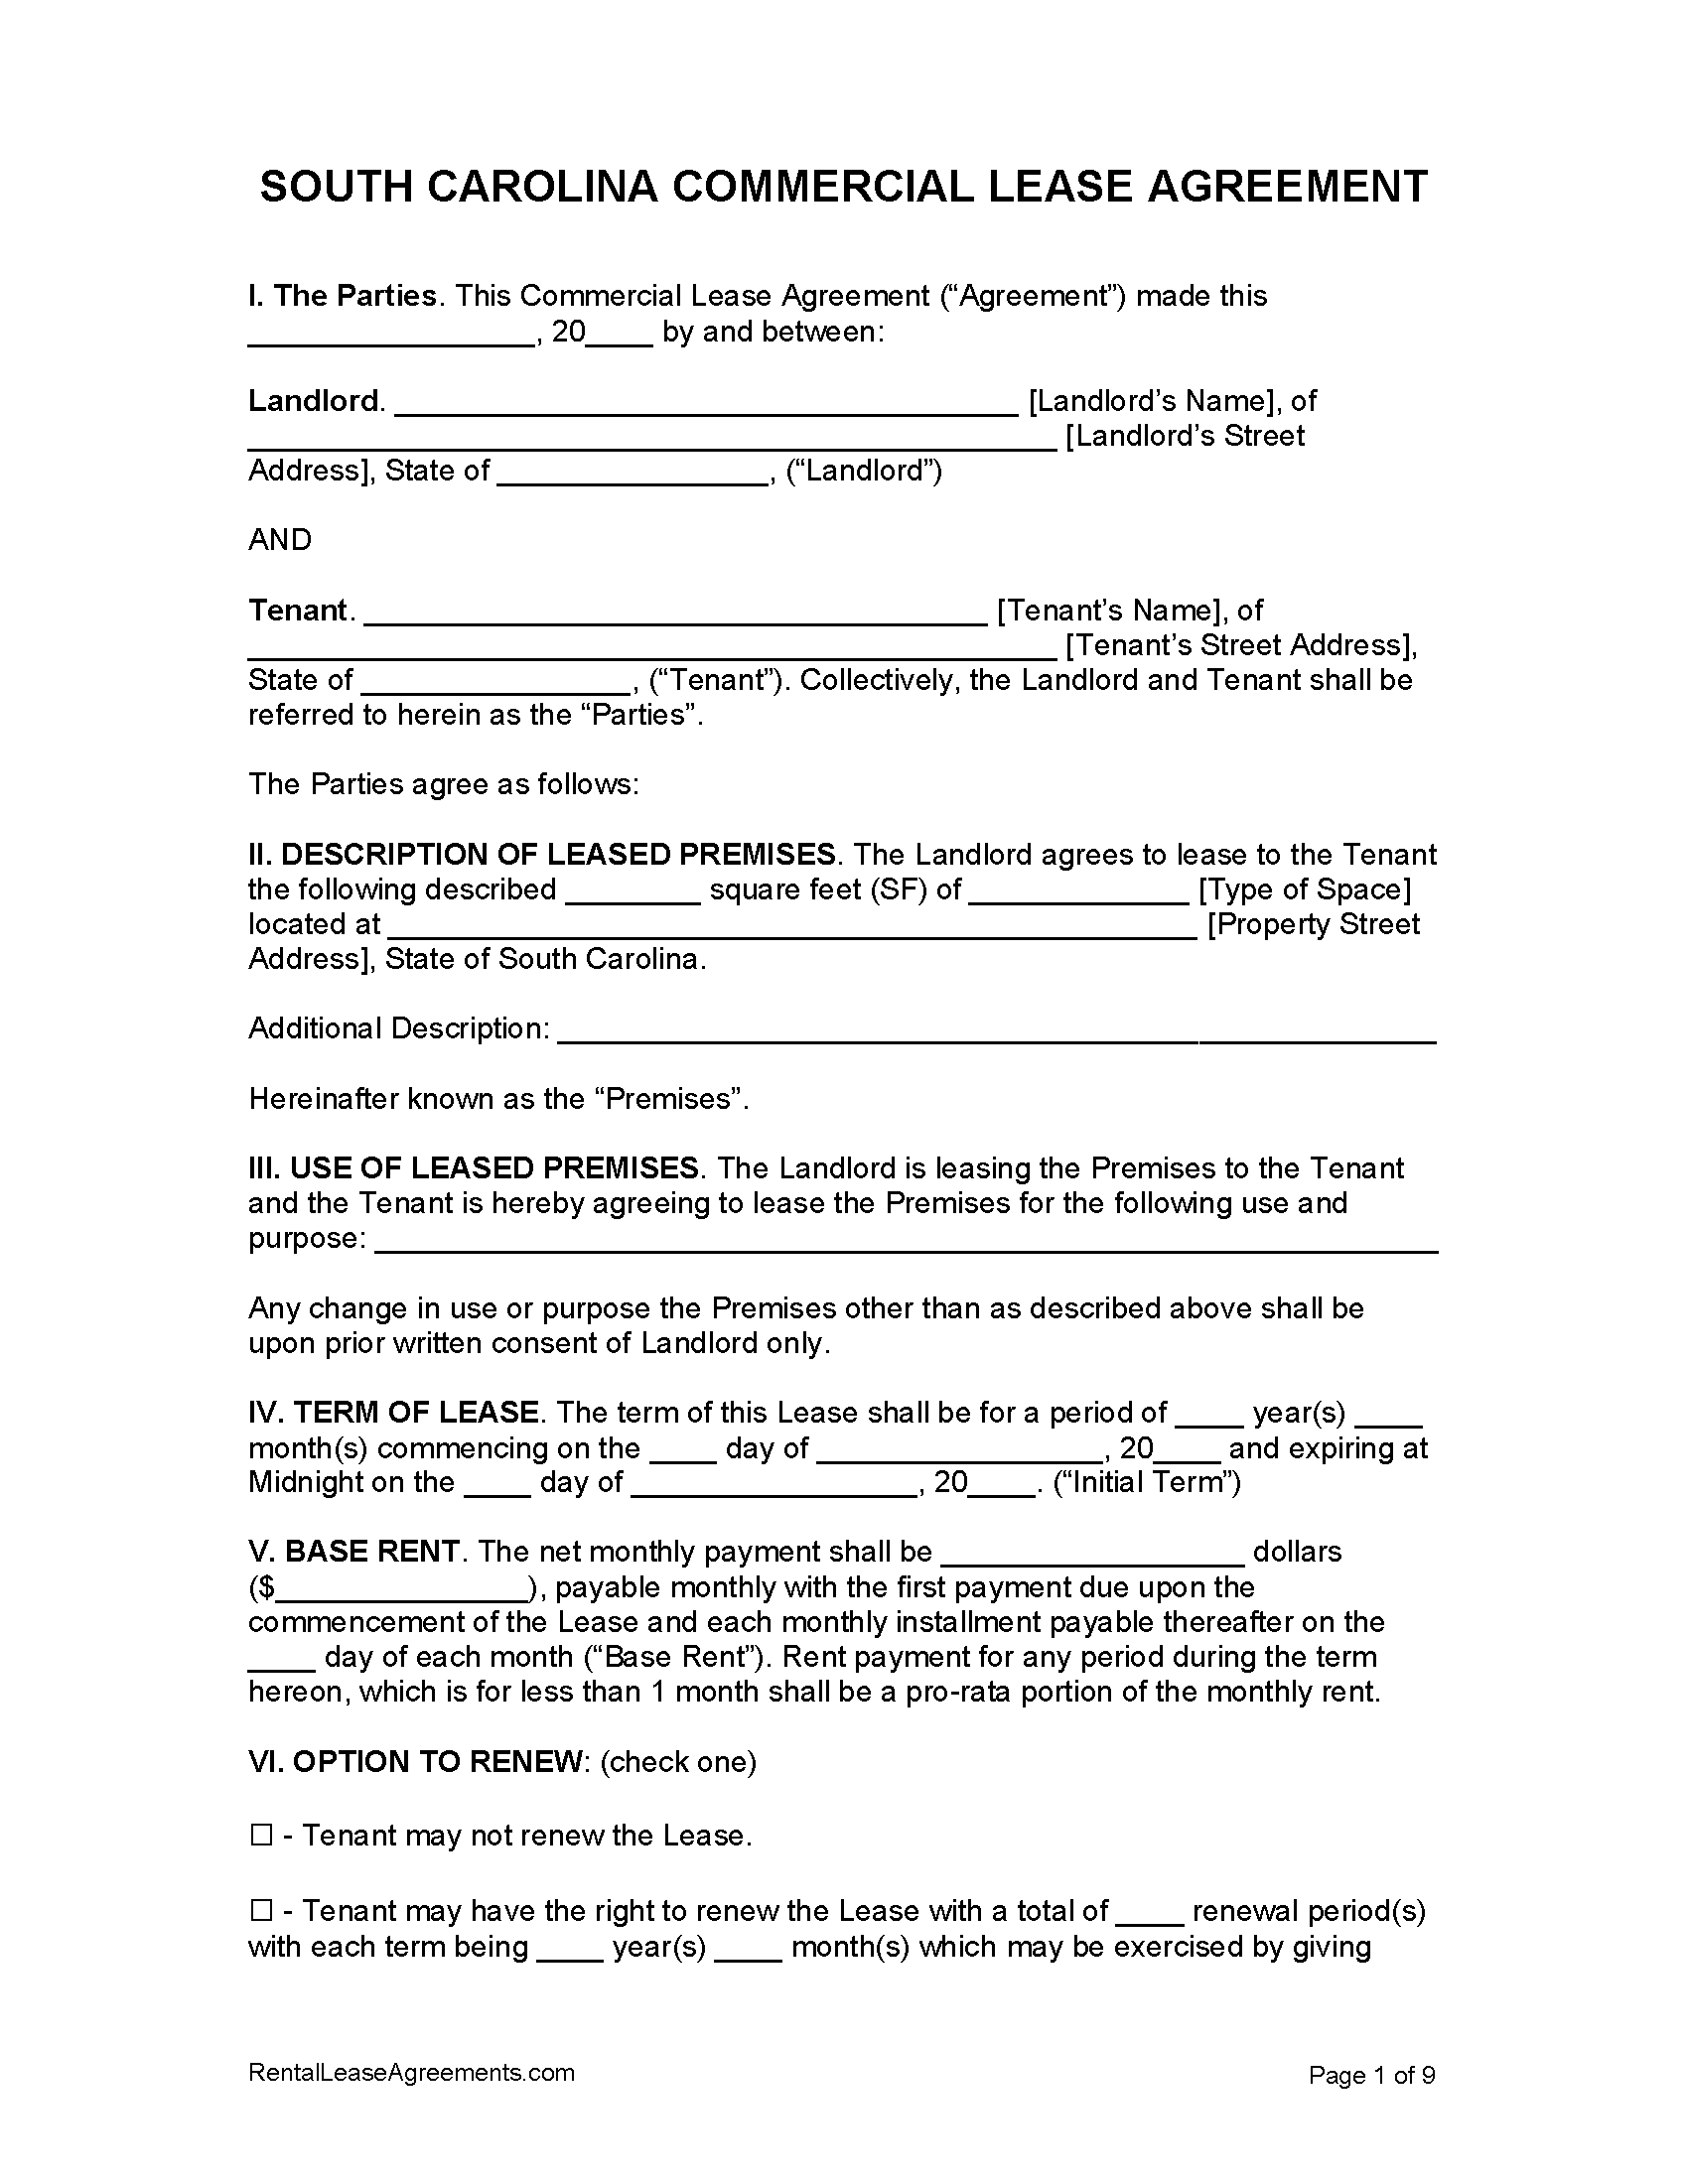 free-south-carolina-commercial-lease-agreement-pdf-ms-word